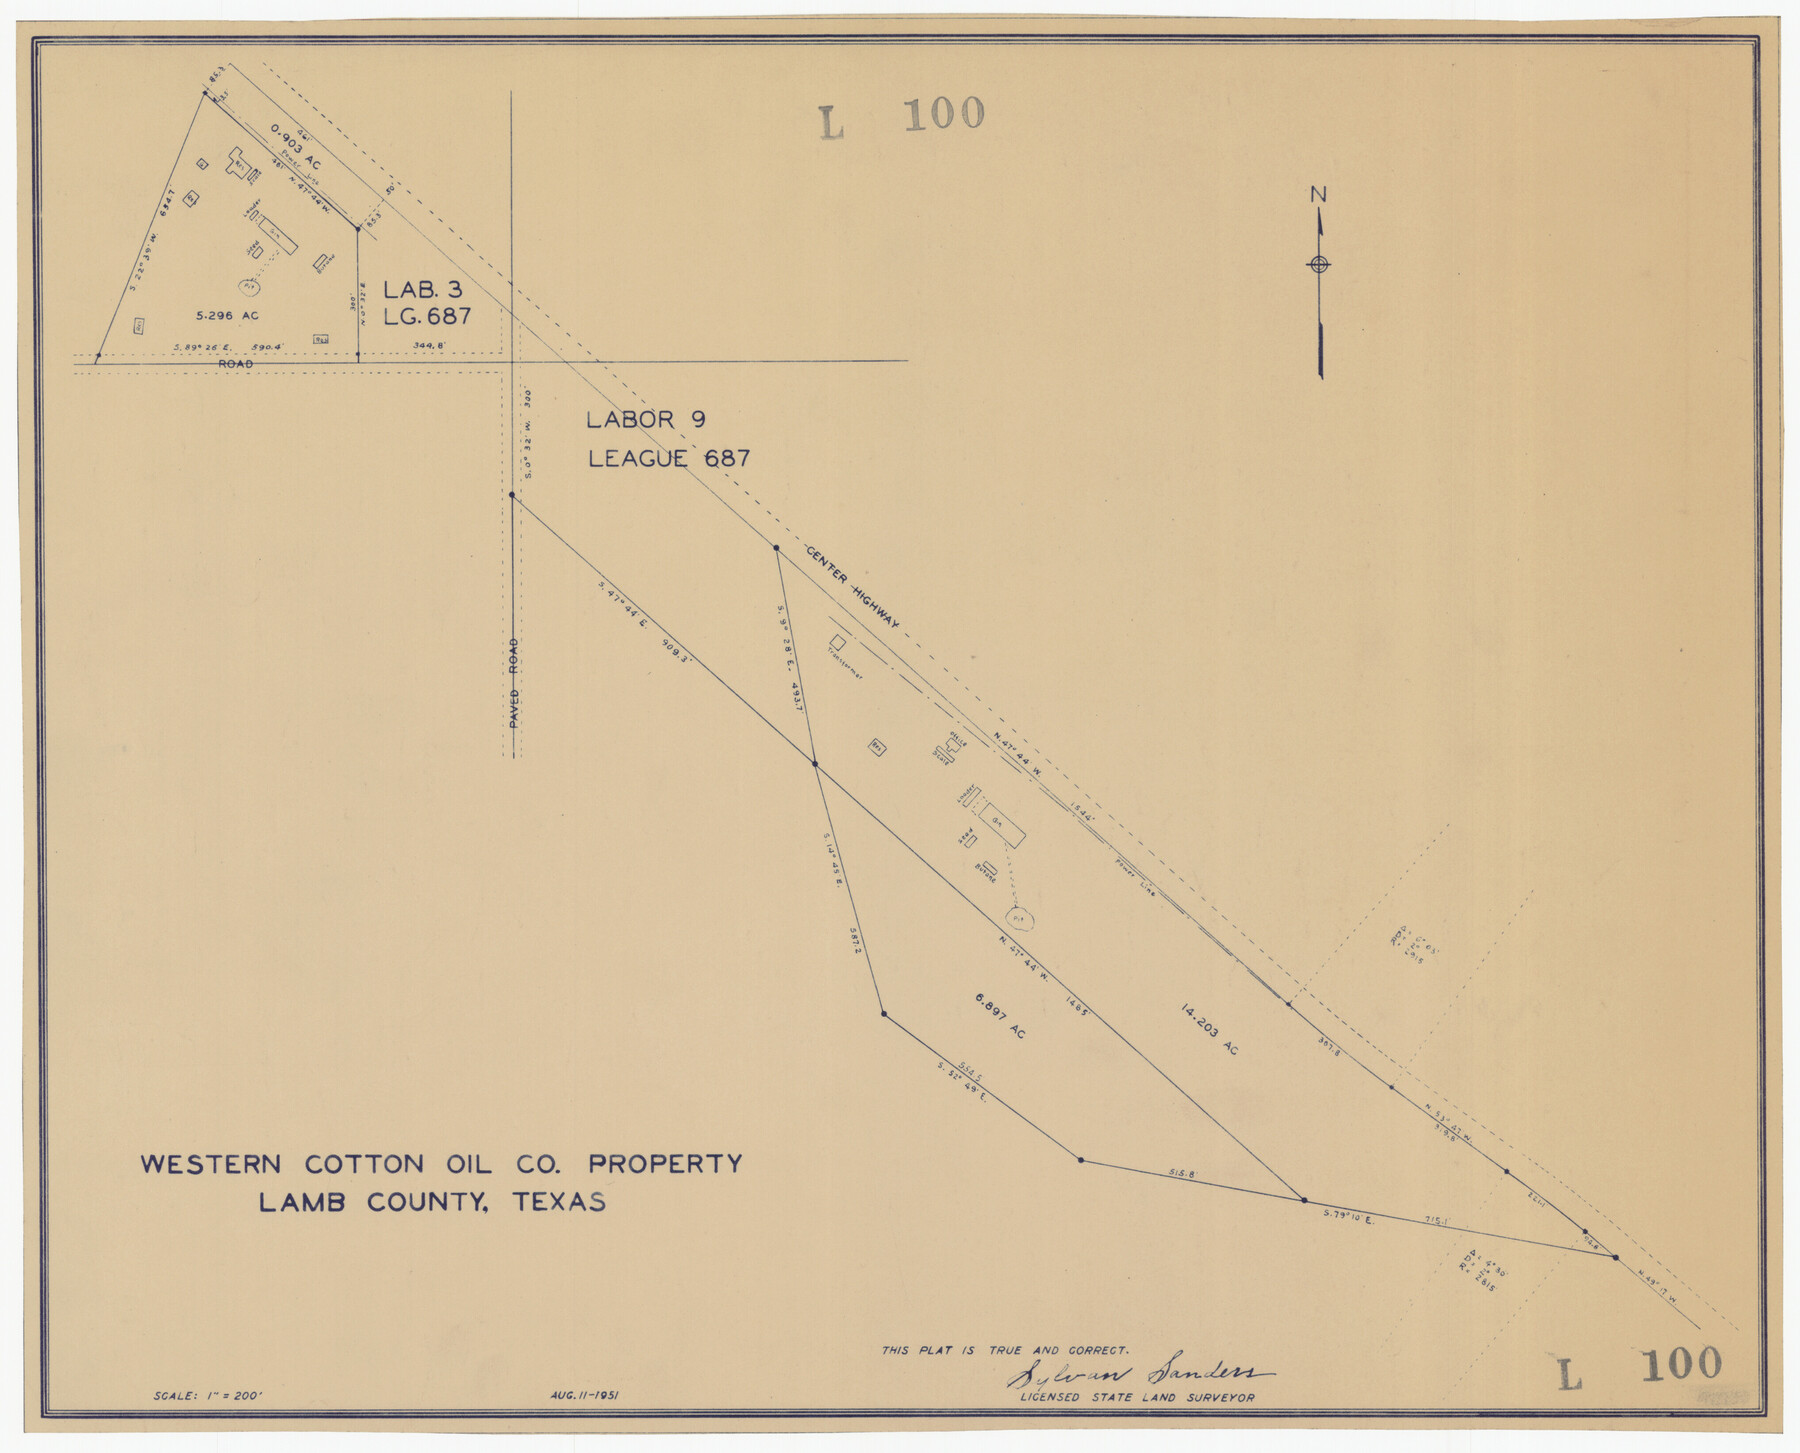 92166, Western Cotton Oil Co. Property Lamb County, Texas, Twichell Survey Records